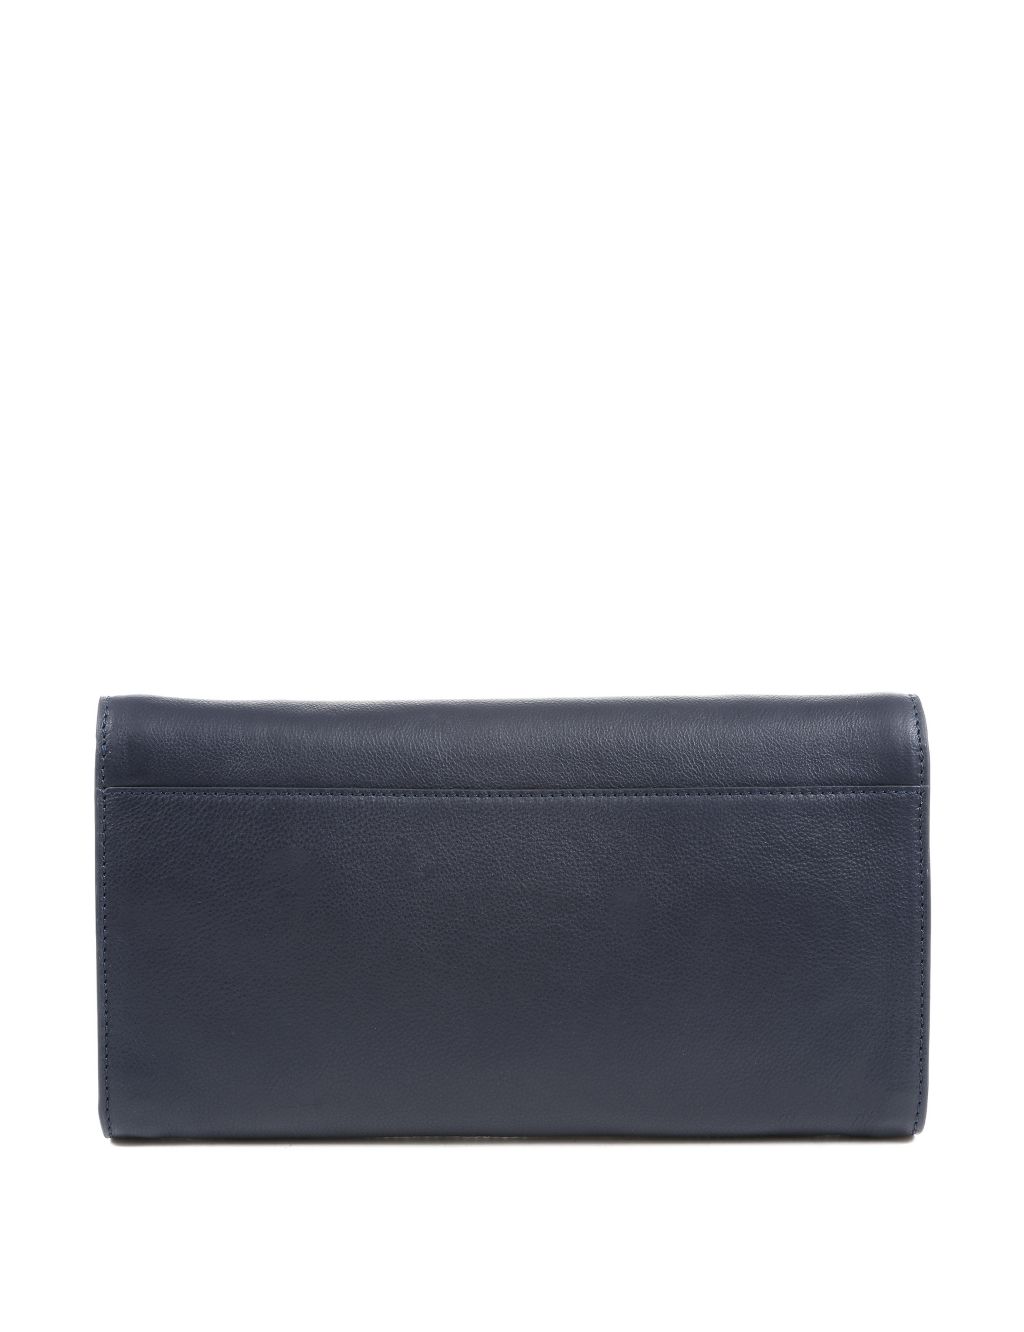 Leather Chain Strap Clutch Bag image 4